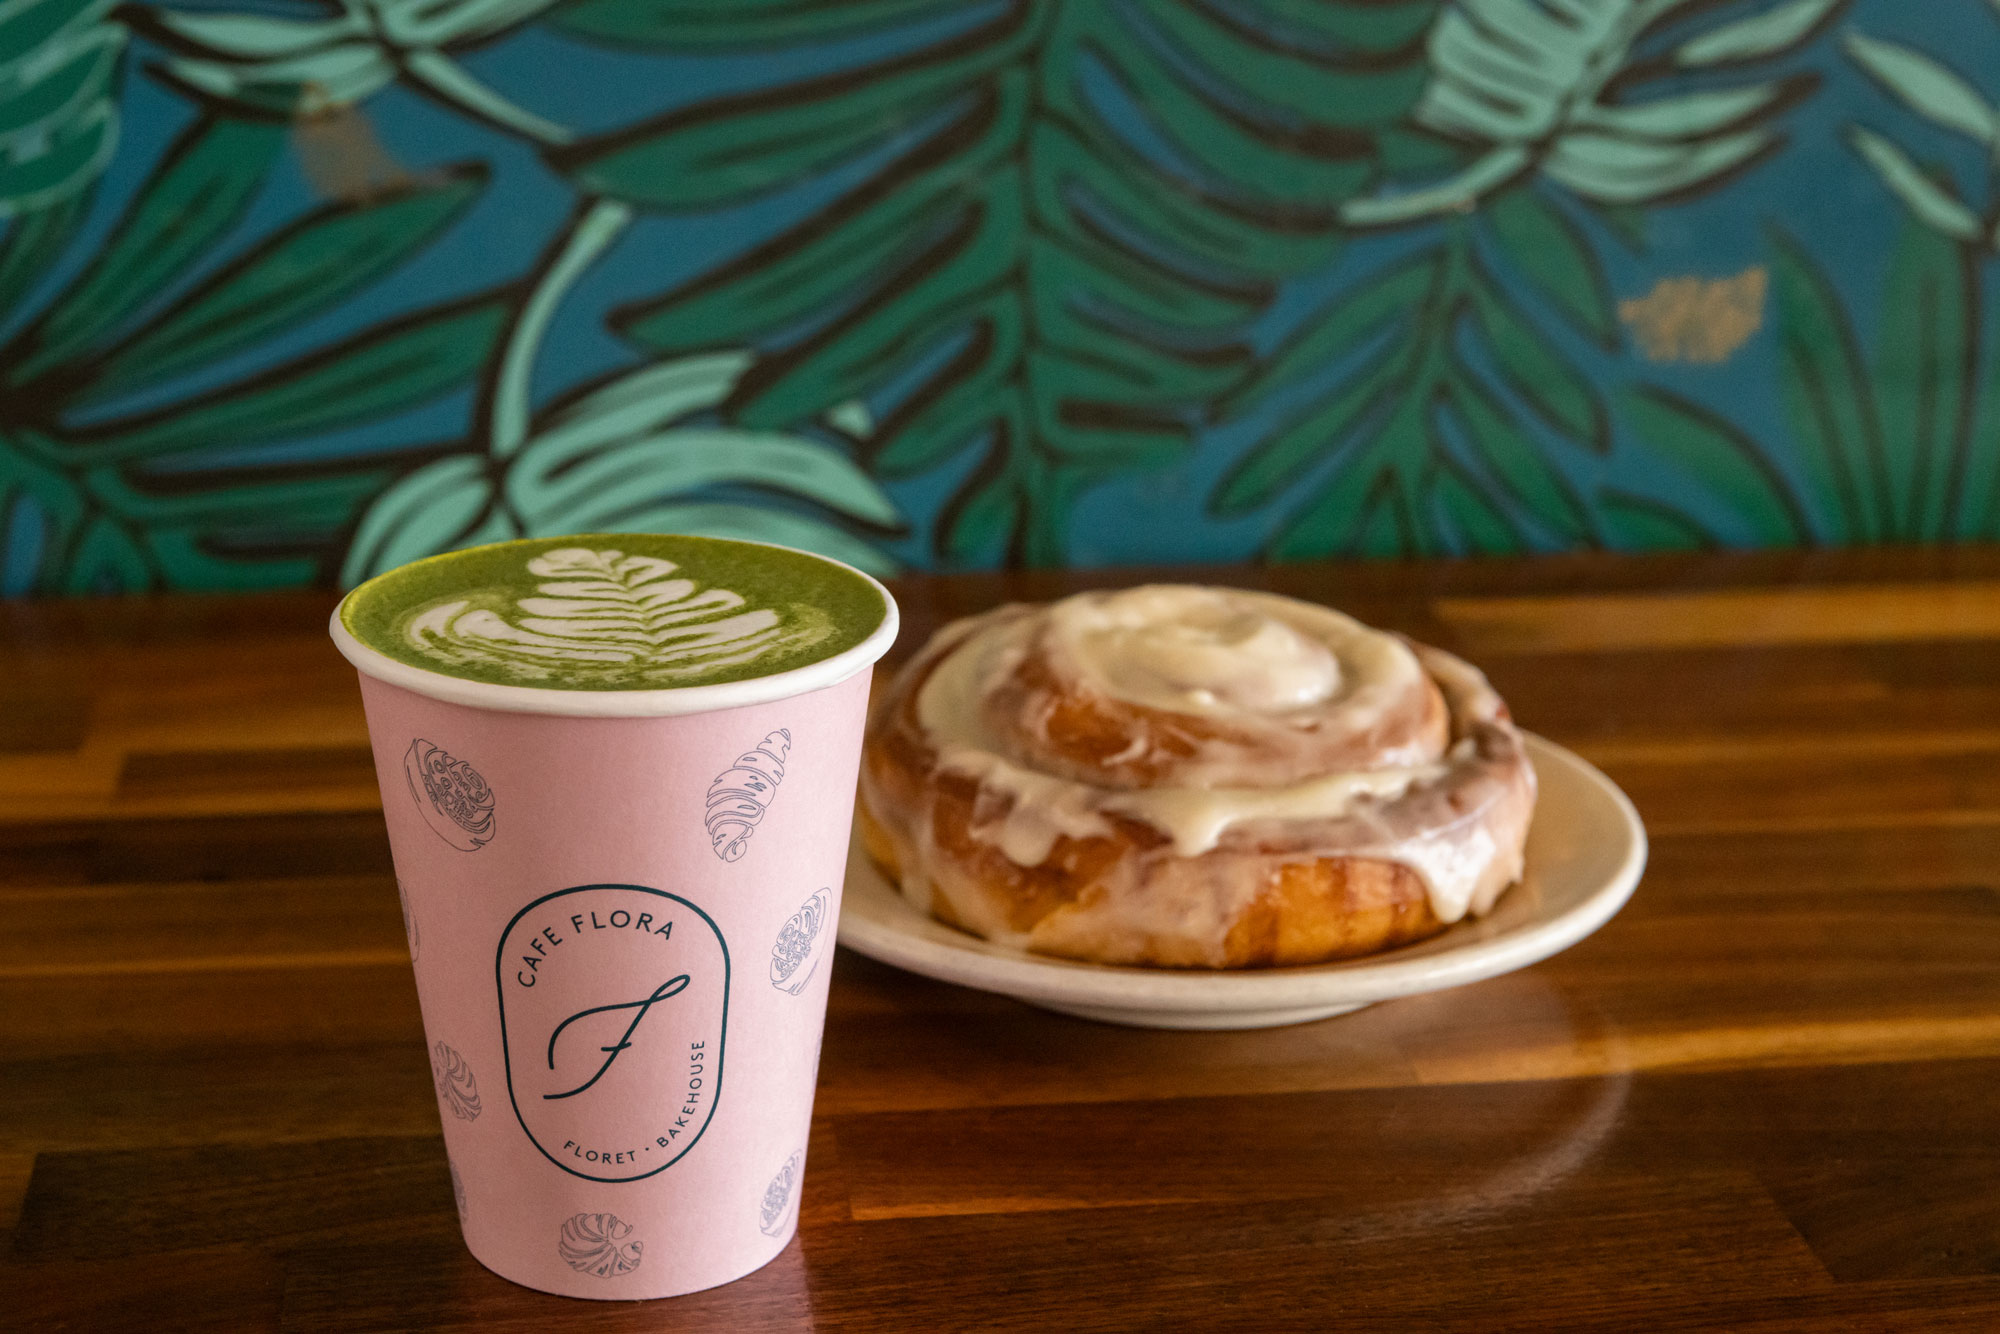 SEA Floret by Cafe Flora cinnamon roll and matcha drink